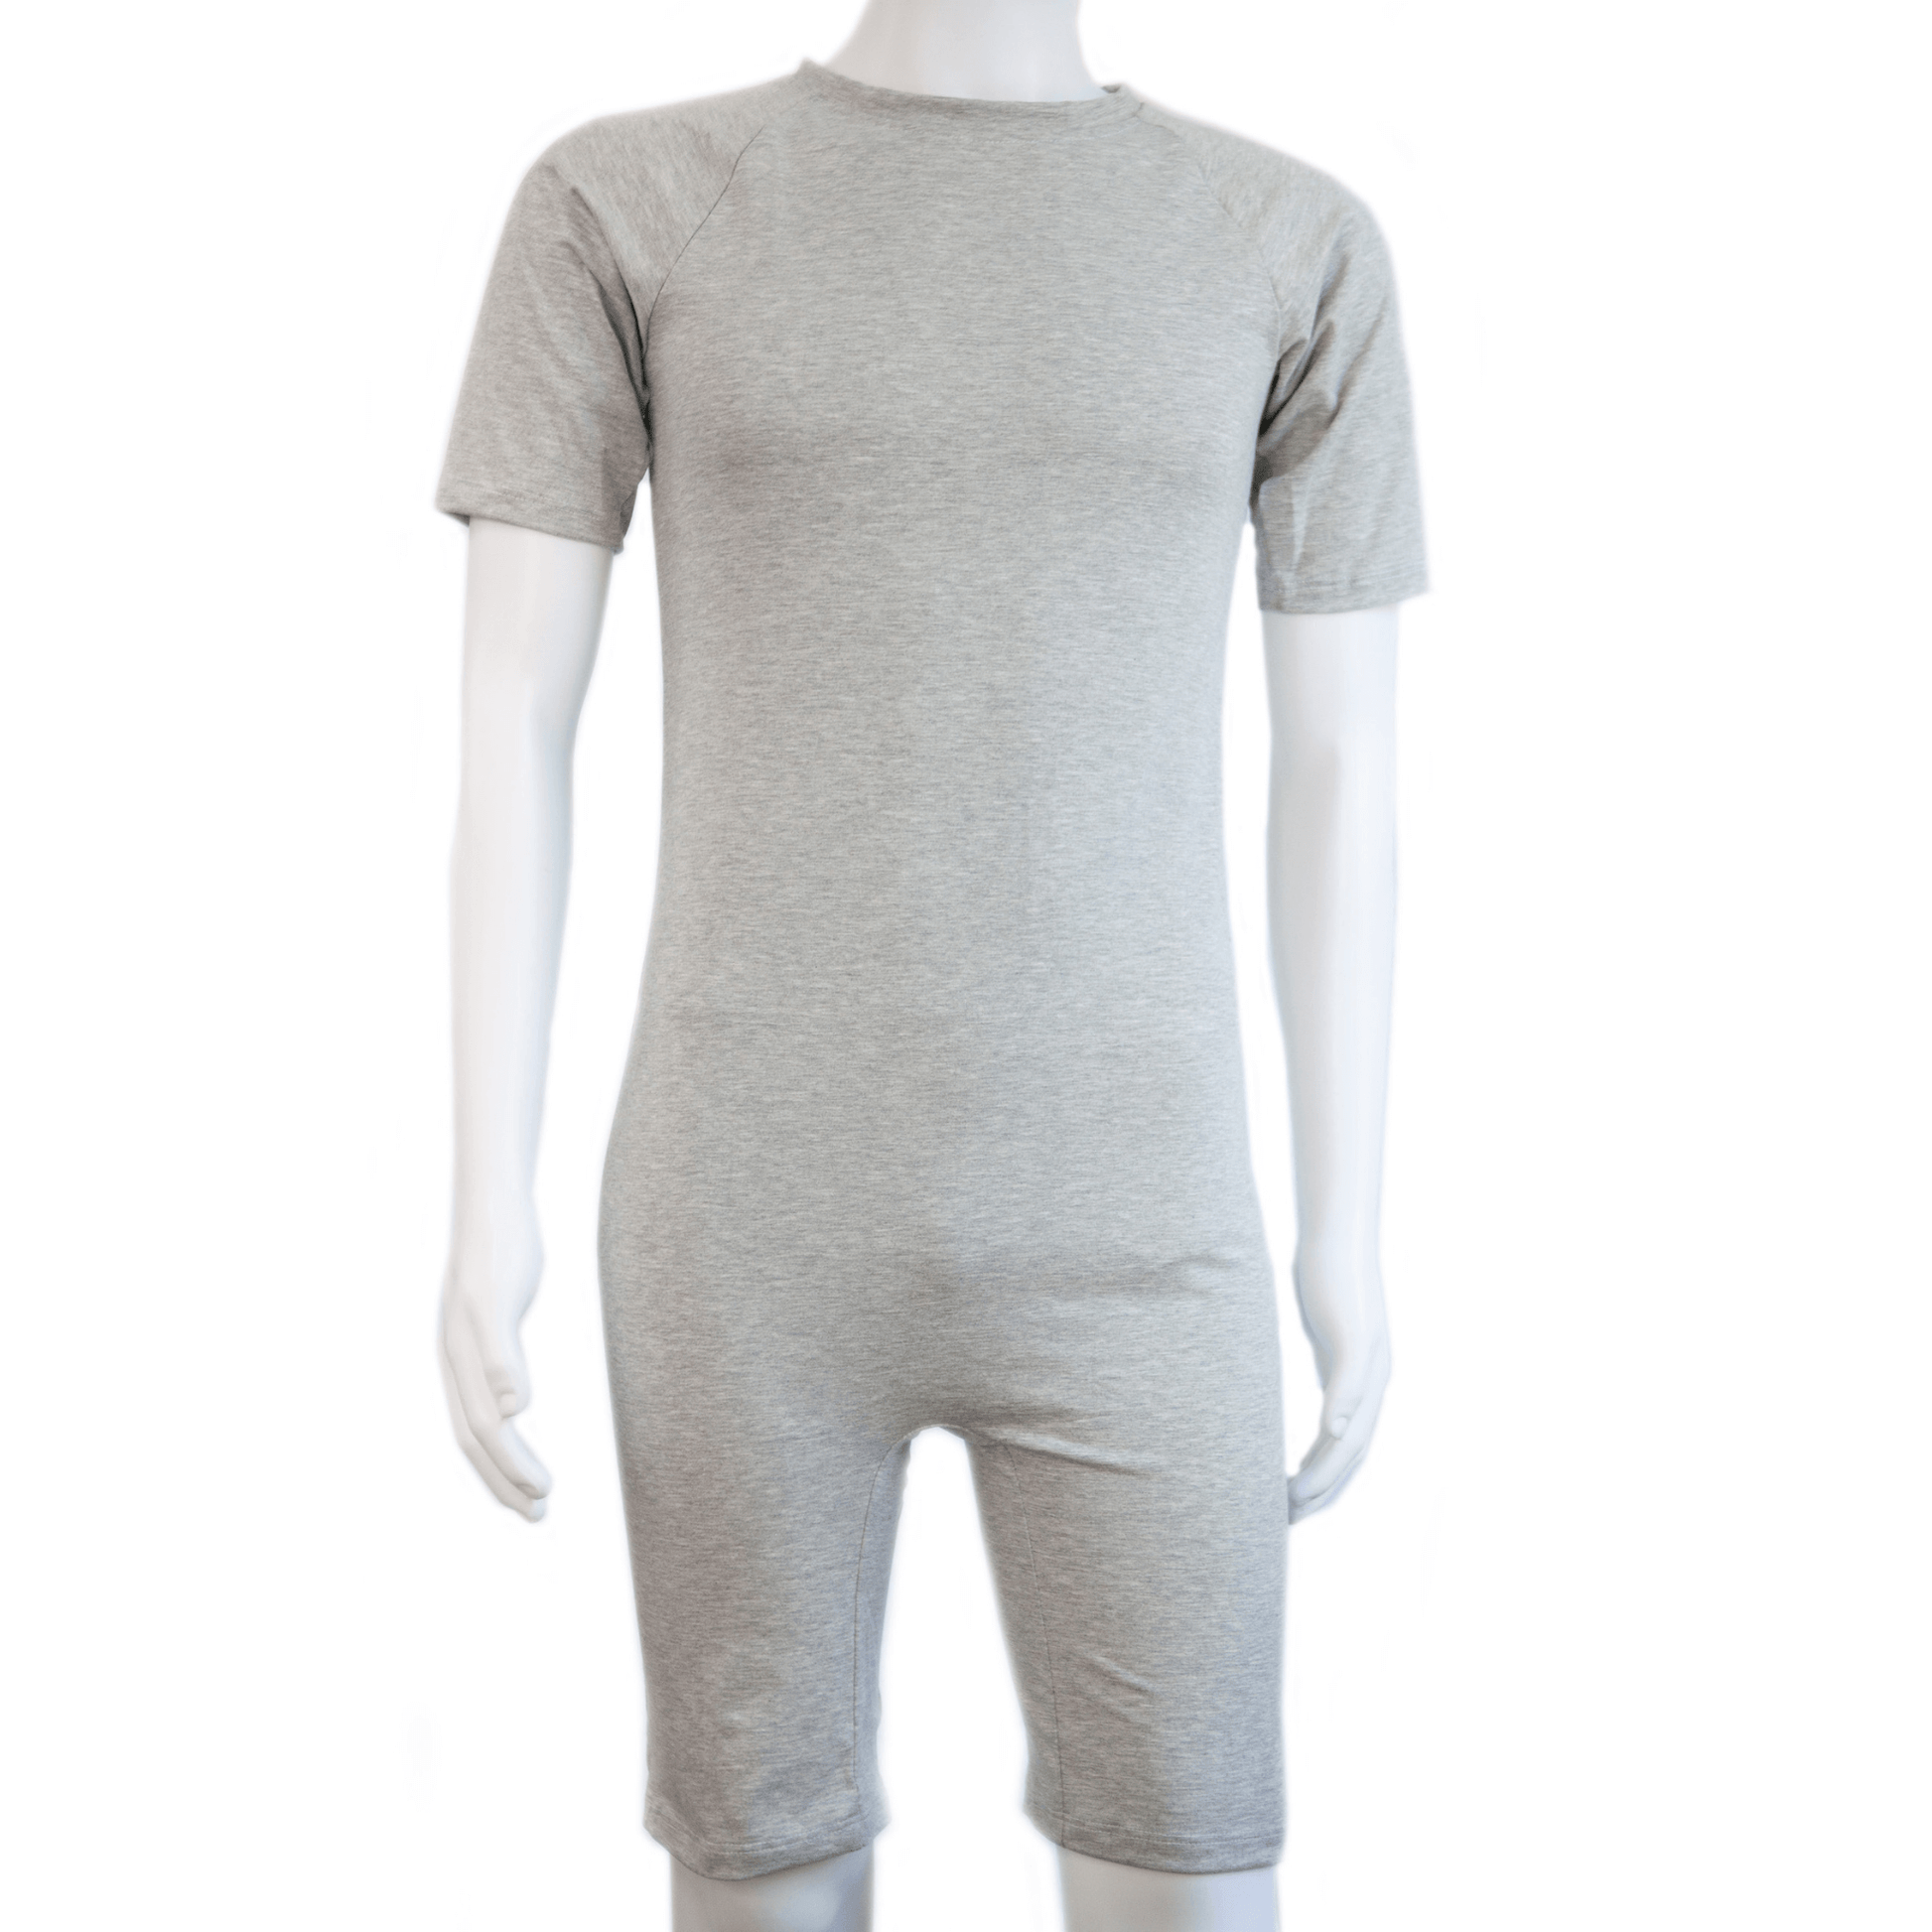 Adult Jumpsuit Onesie with Short Sleeve & Short leg - Caring Clothing